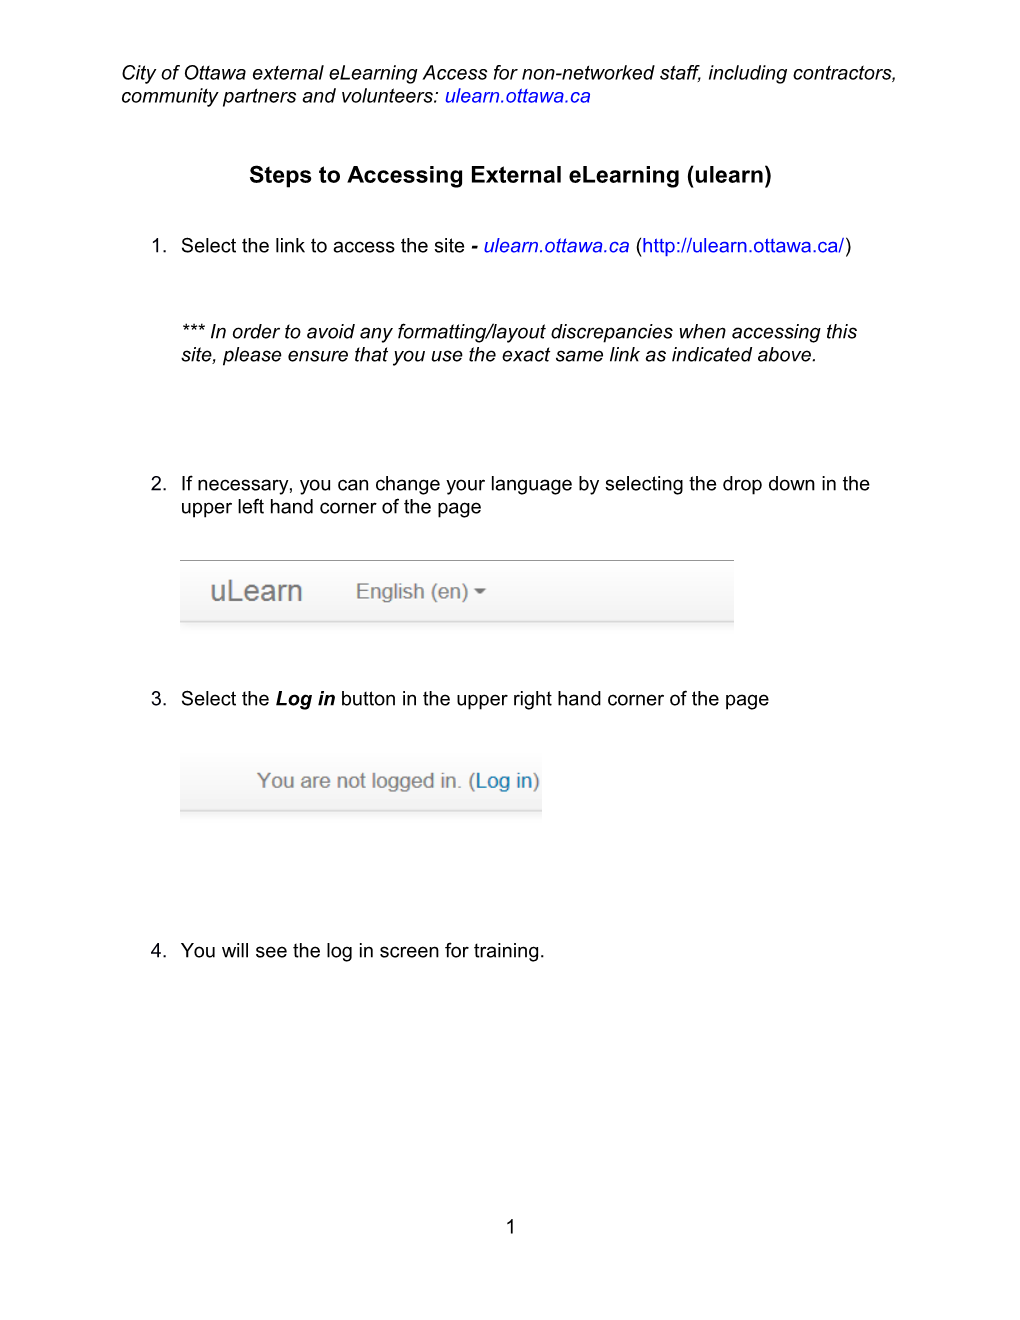 Steps to Accessing External Elearning (Ulearn)